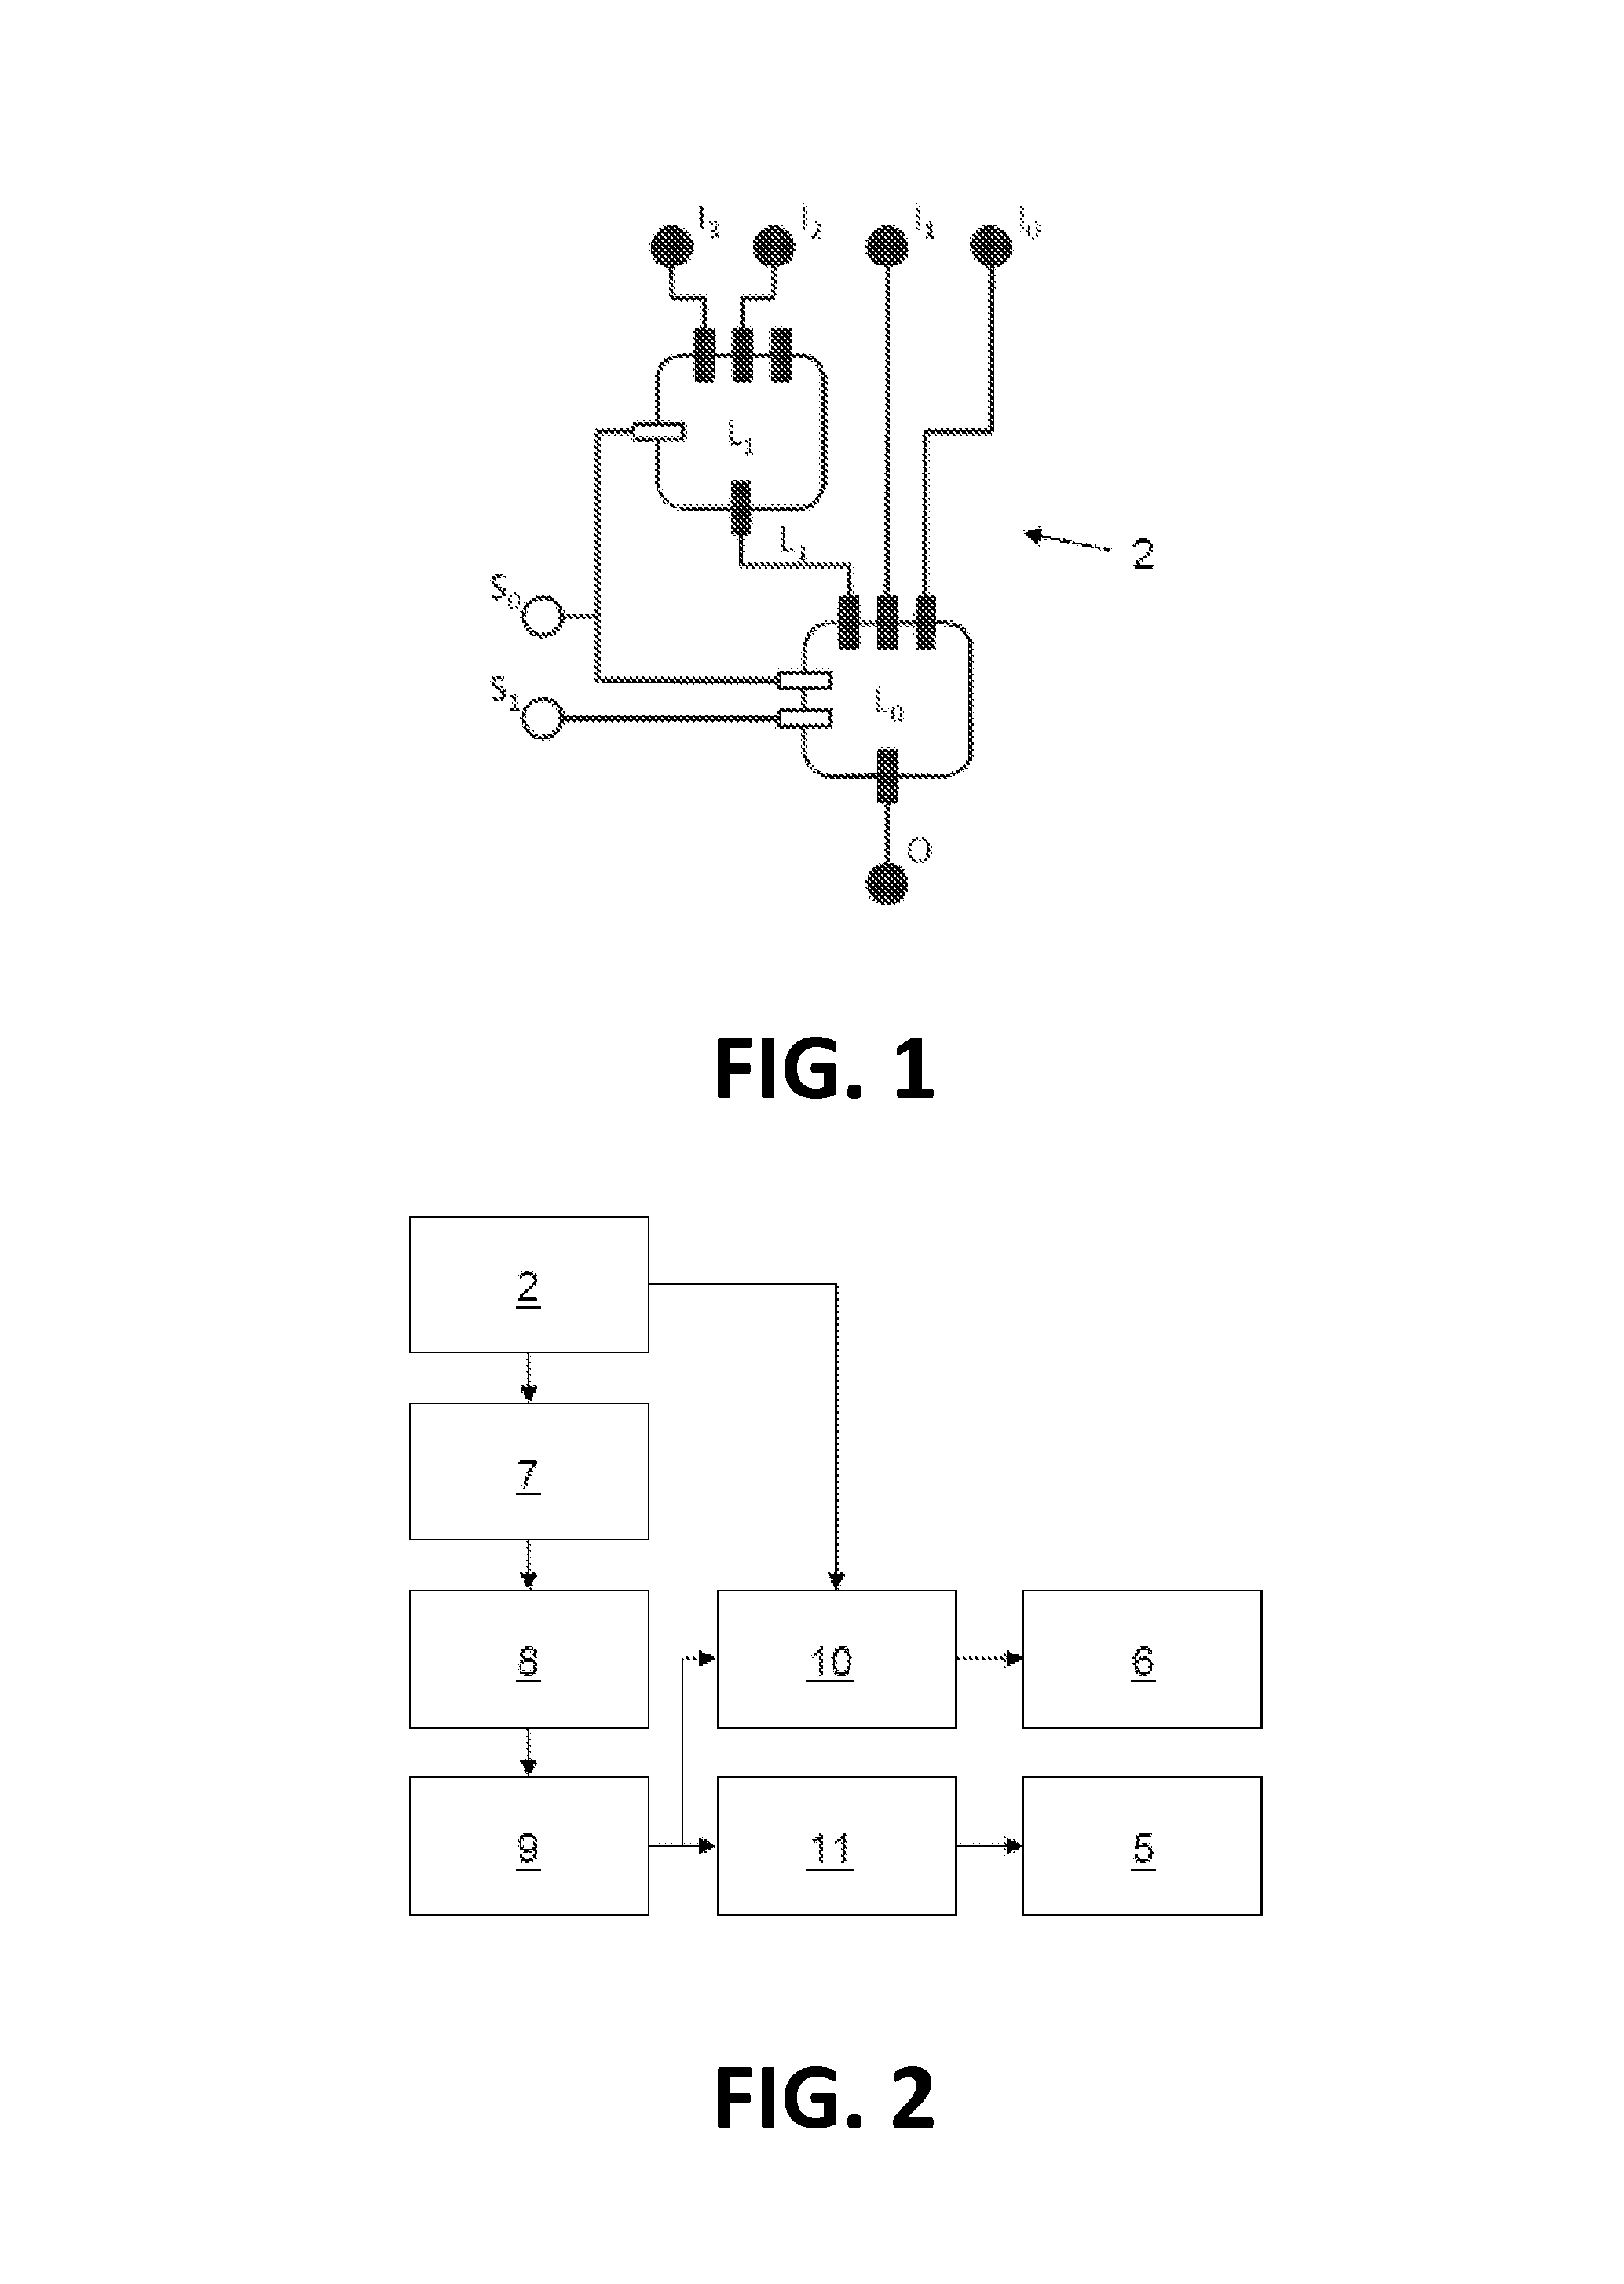 Parameterized configuration for a programmable logic device